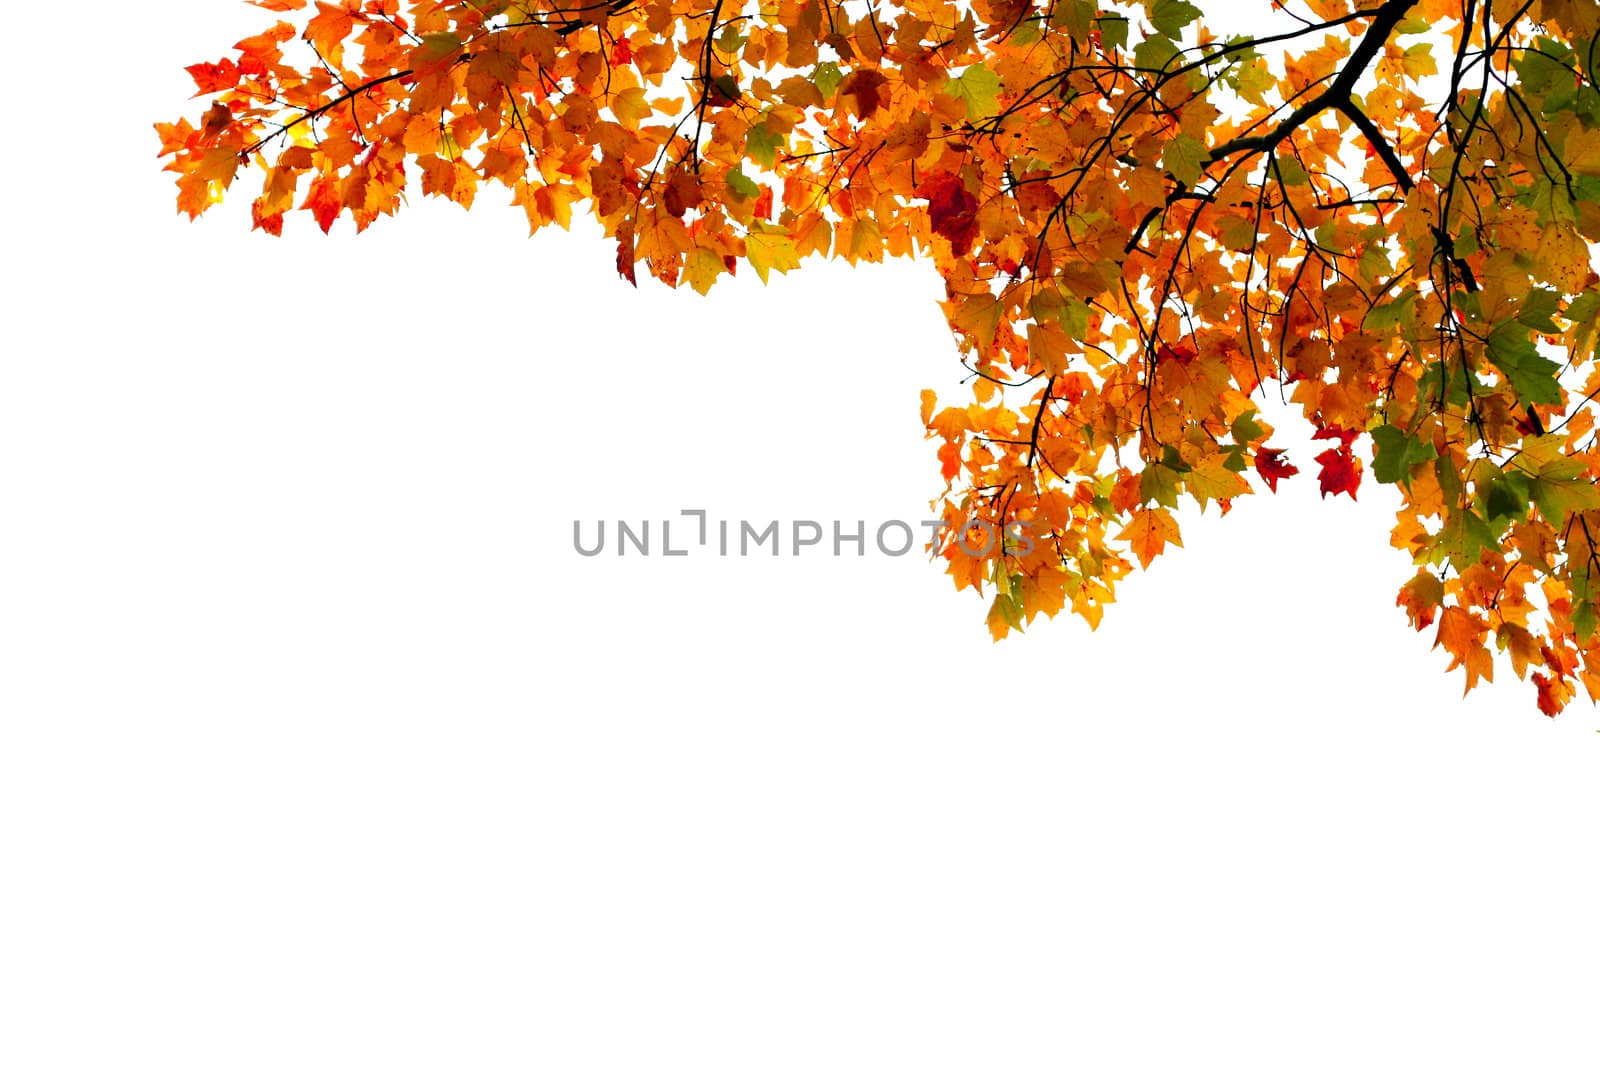 Vividly colored autumn leaves in corner of frame; by jarenwicklund